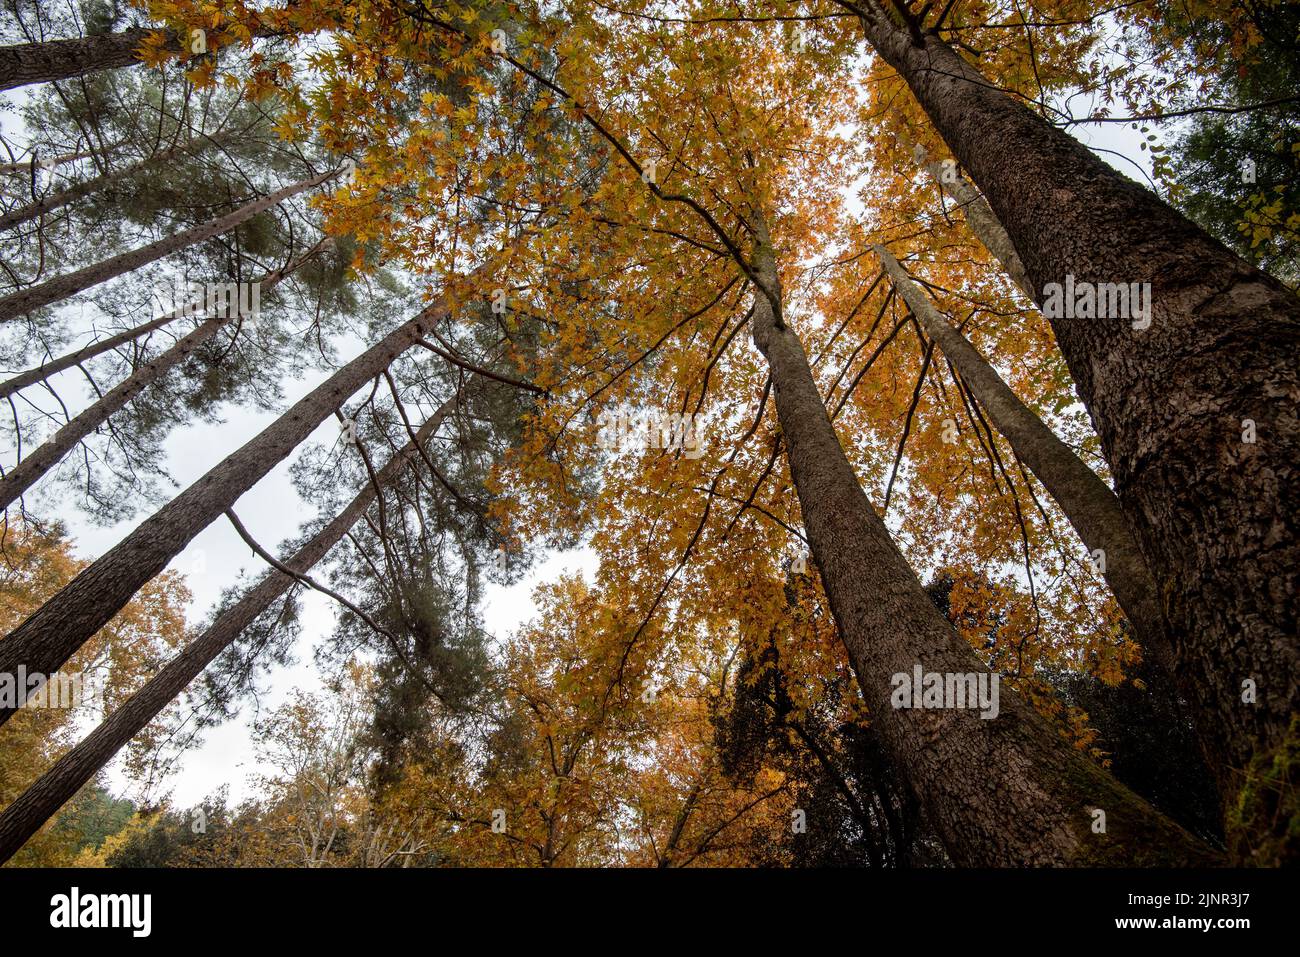 Low angle view of tree trunk tops yellow falling leaves in autumn season Stock Photo